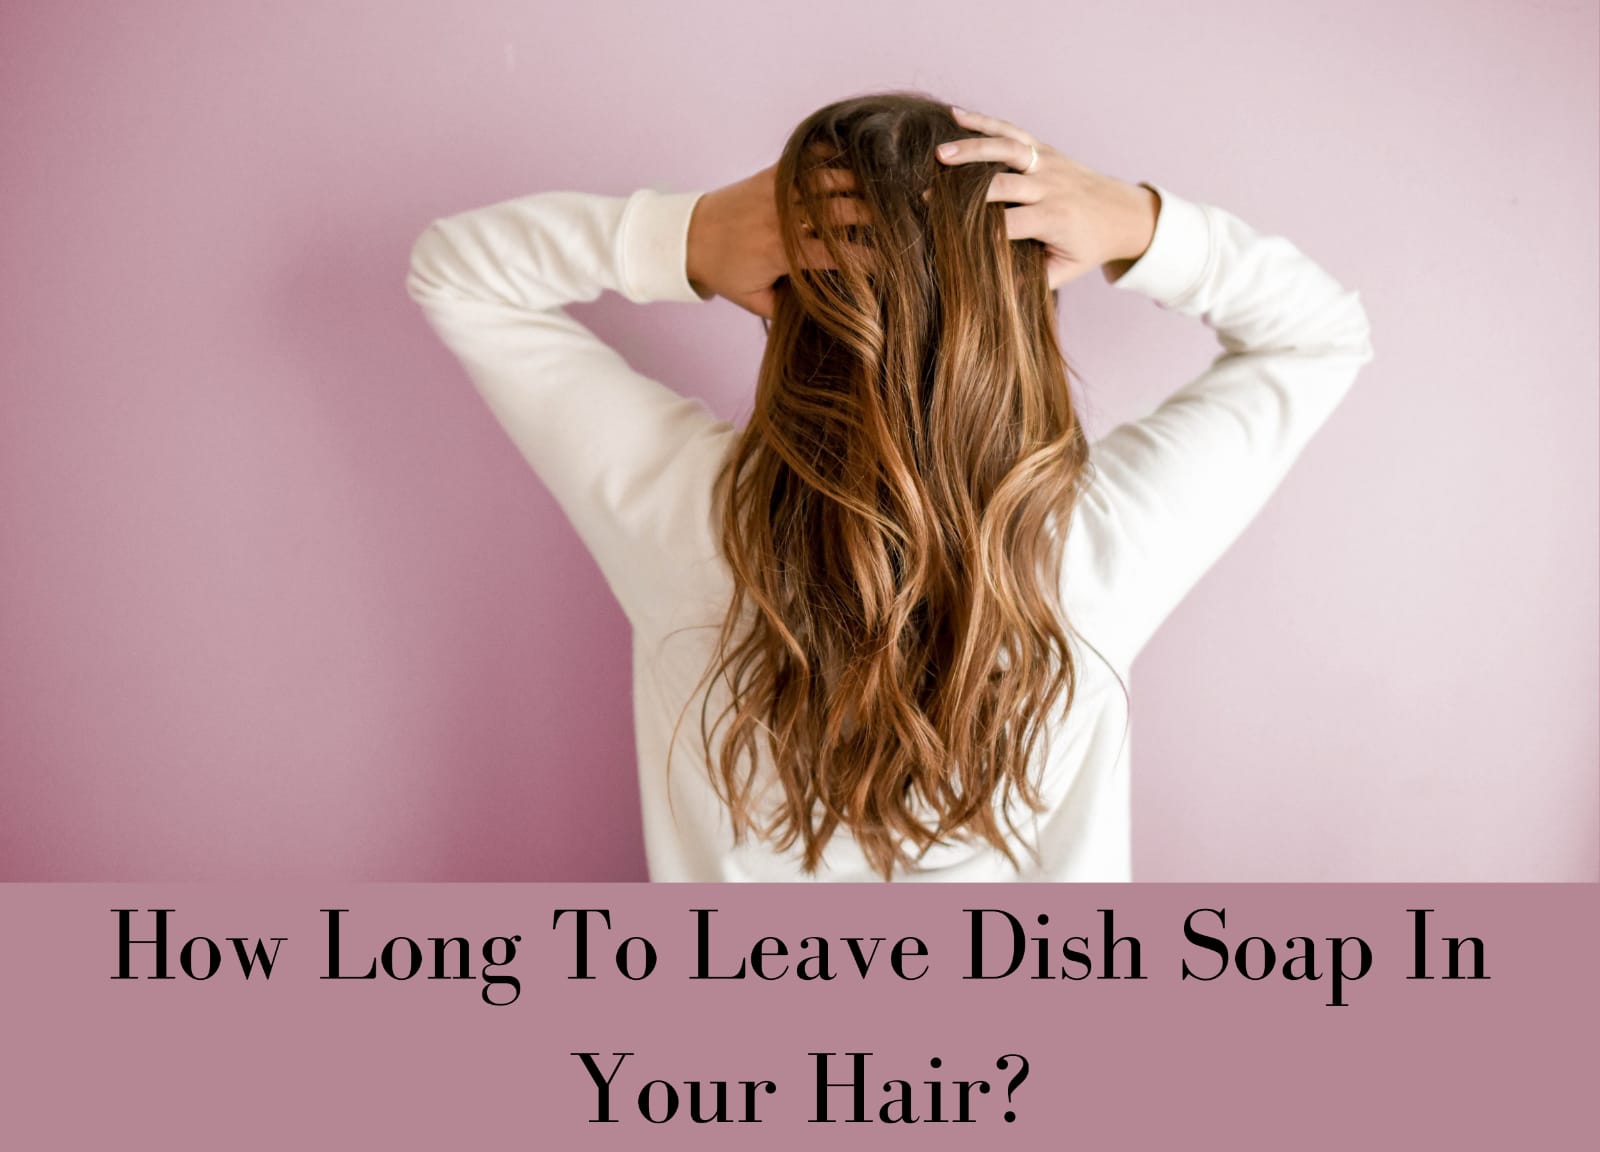 How Long To Leave Dish Soap In your Hair